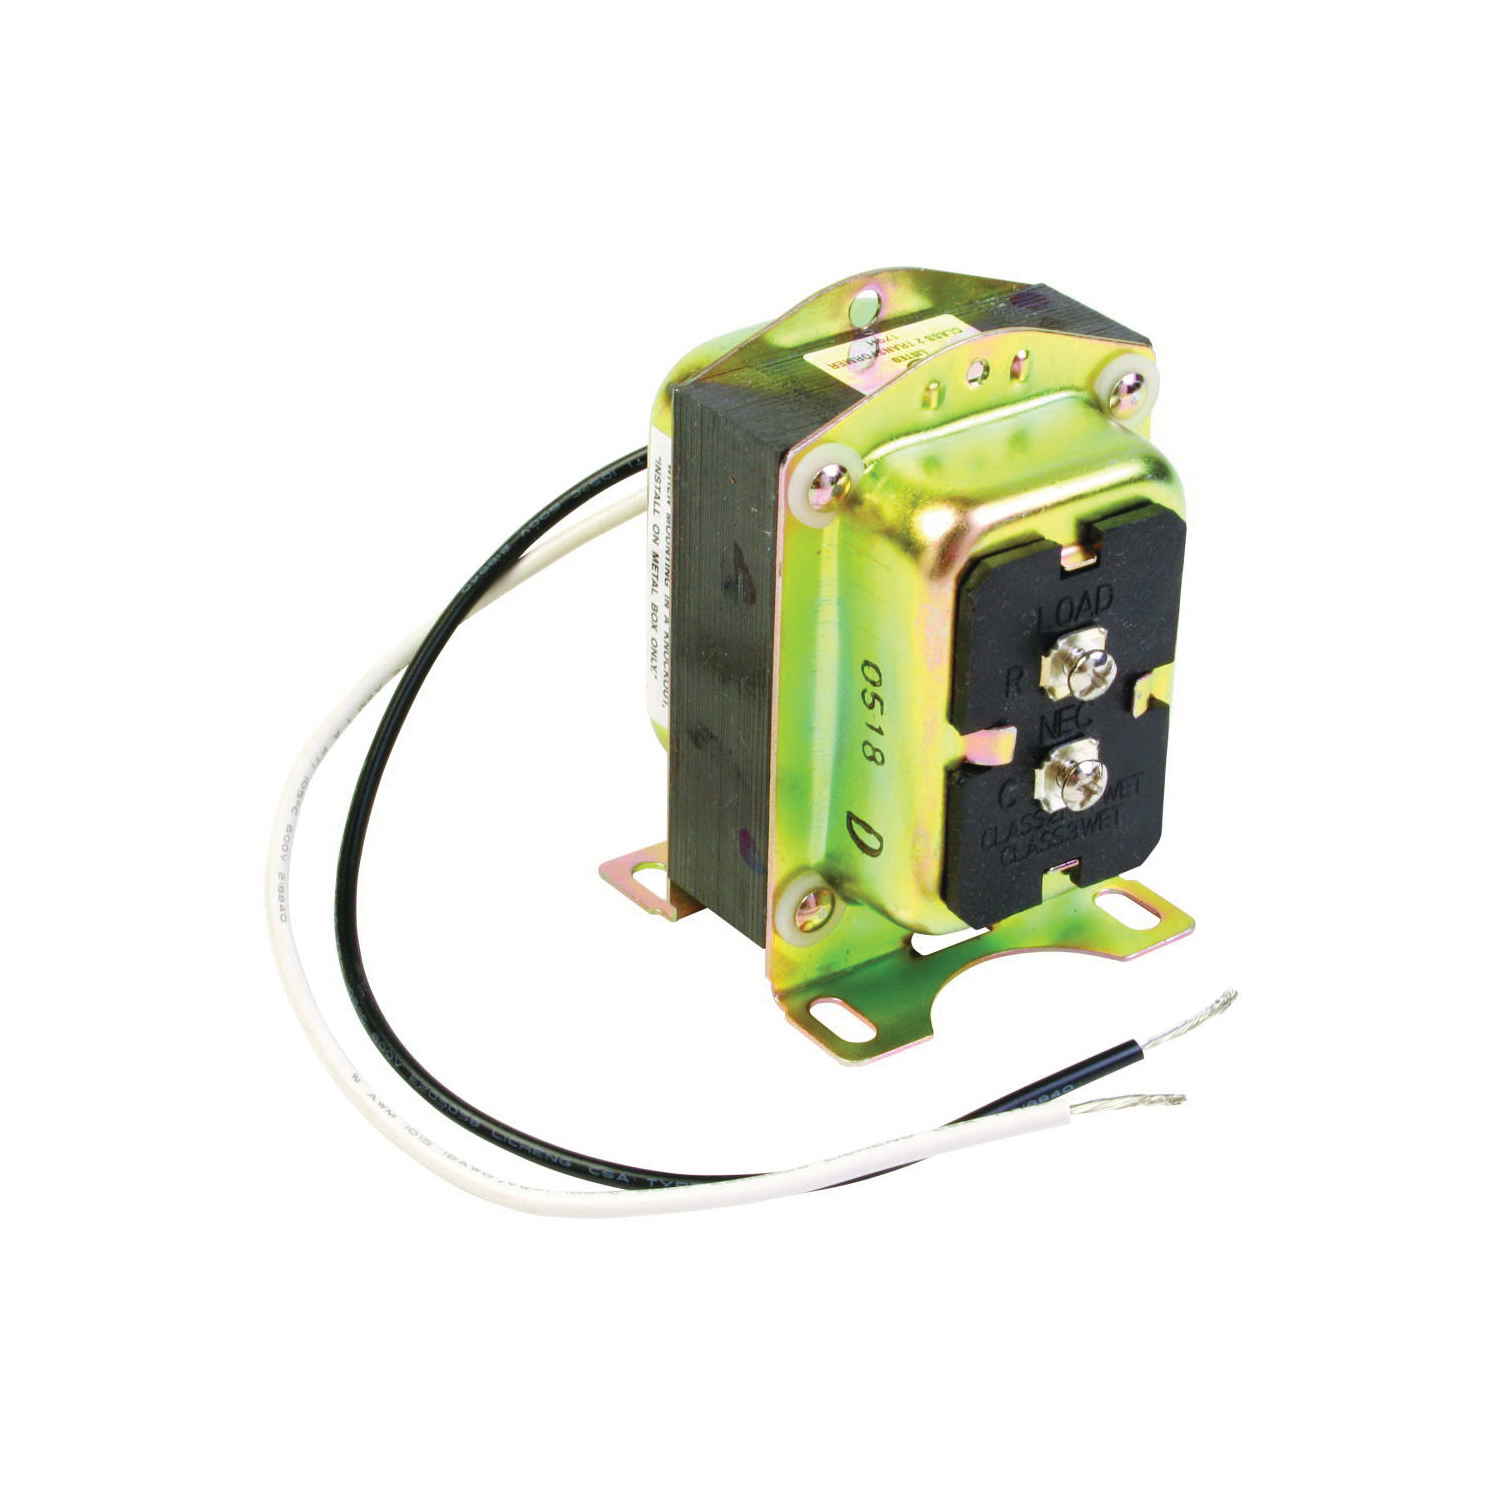 Resideo AT140A1000/U Transformer With 9 in Lead Wires, 120 VAC Primary, 27 VAC Secondary, 40 VA Power Rating